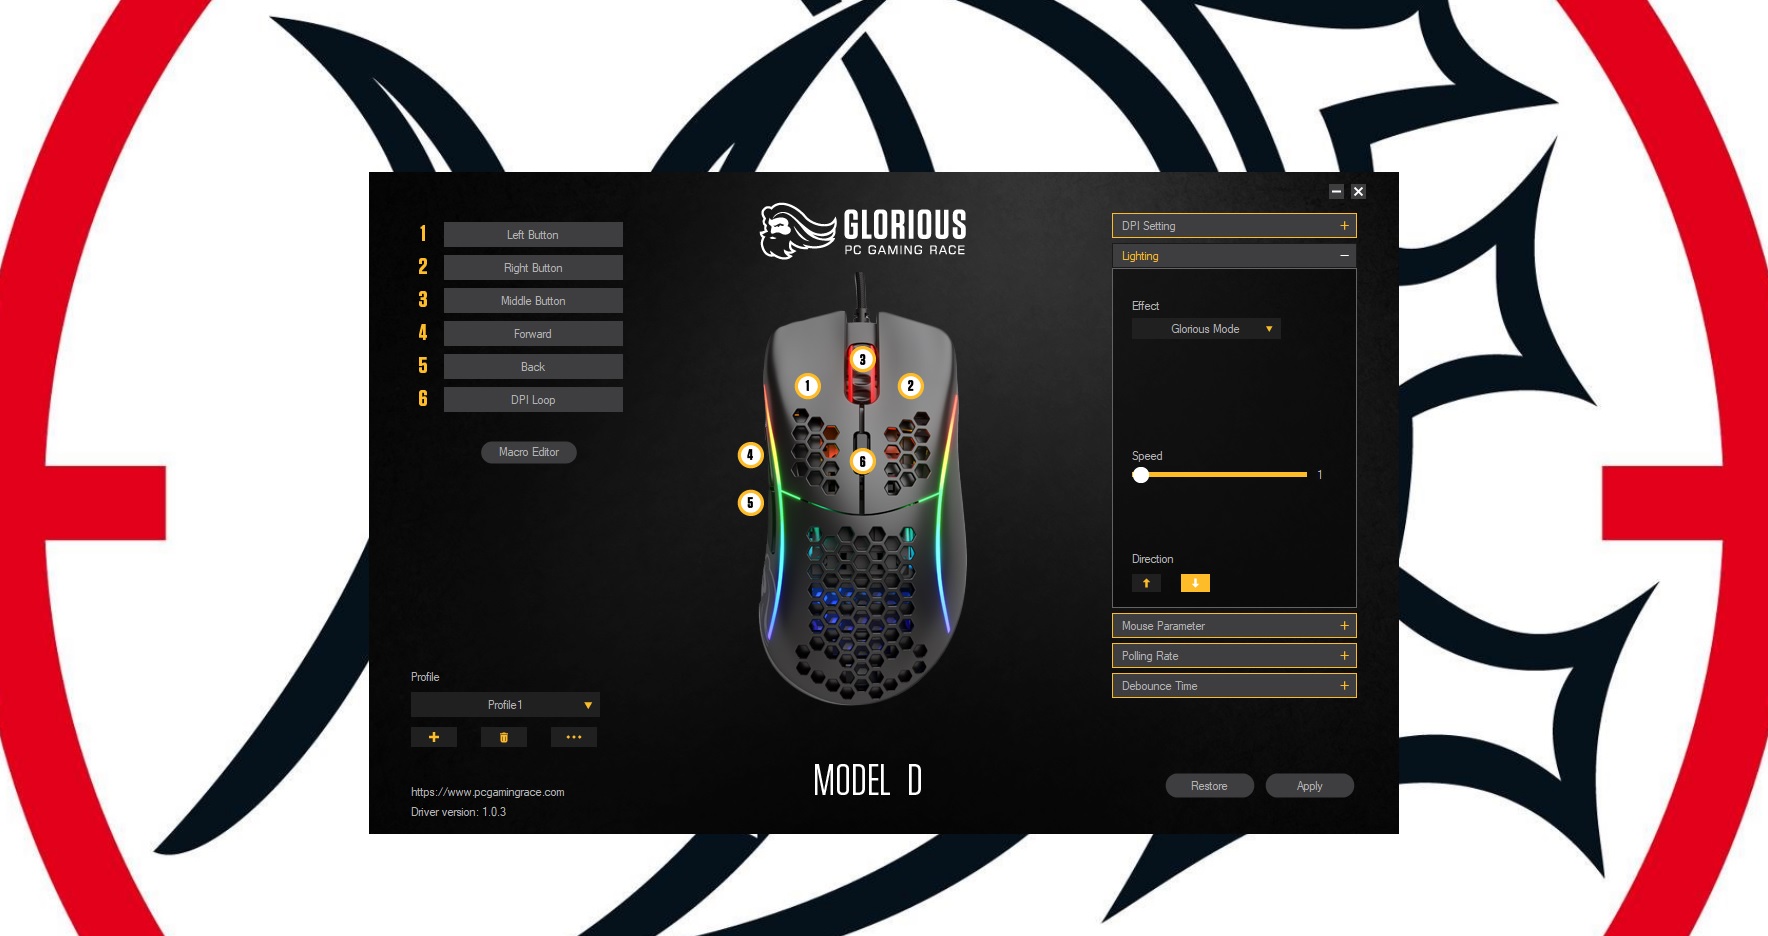 Glorious Model D Gaming Maus Software Glorious Model D bei uns im Test